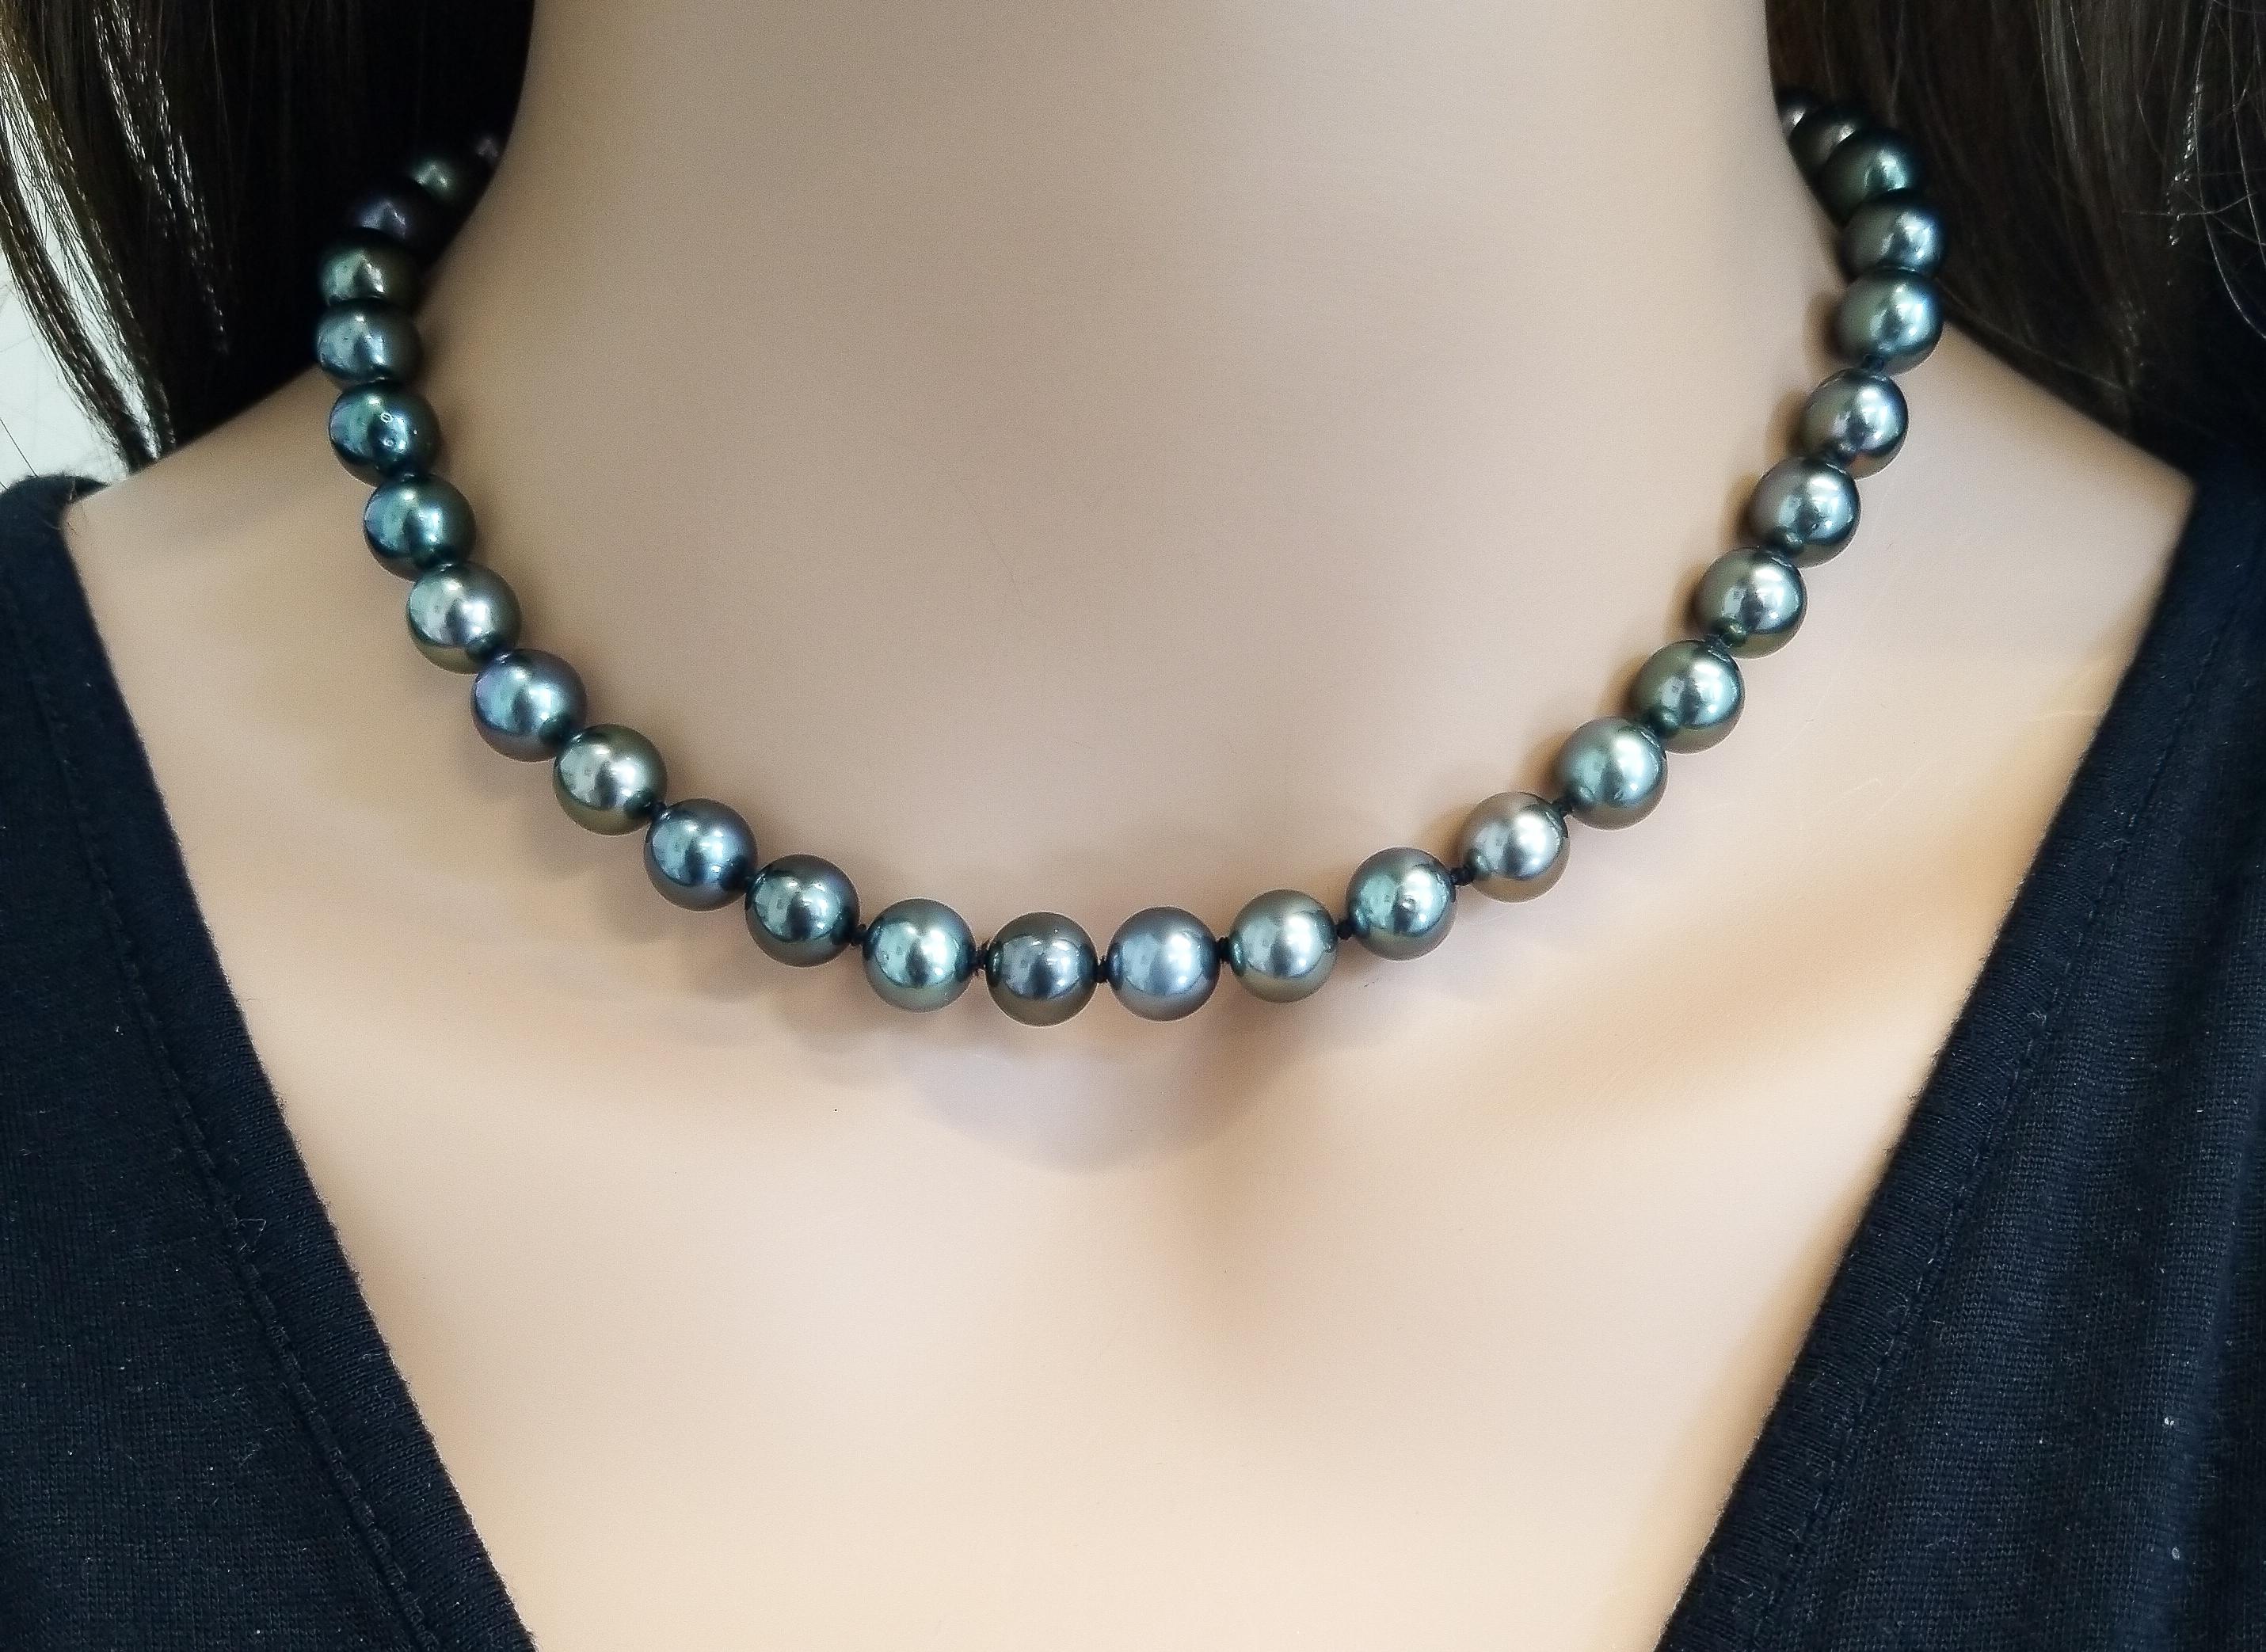 This necklace sets you apart from the crowd! It is brimming with style, elegance, and timeless sophistication. This extravagant Tahitian black pearl and diamond necklace delivers on panache and complexity and fastens securely with a 14 Karat diamond